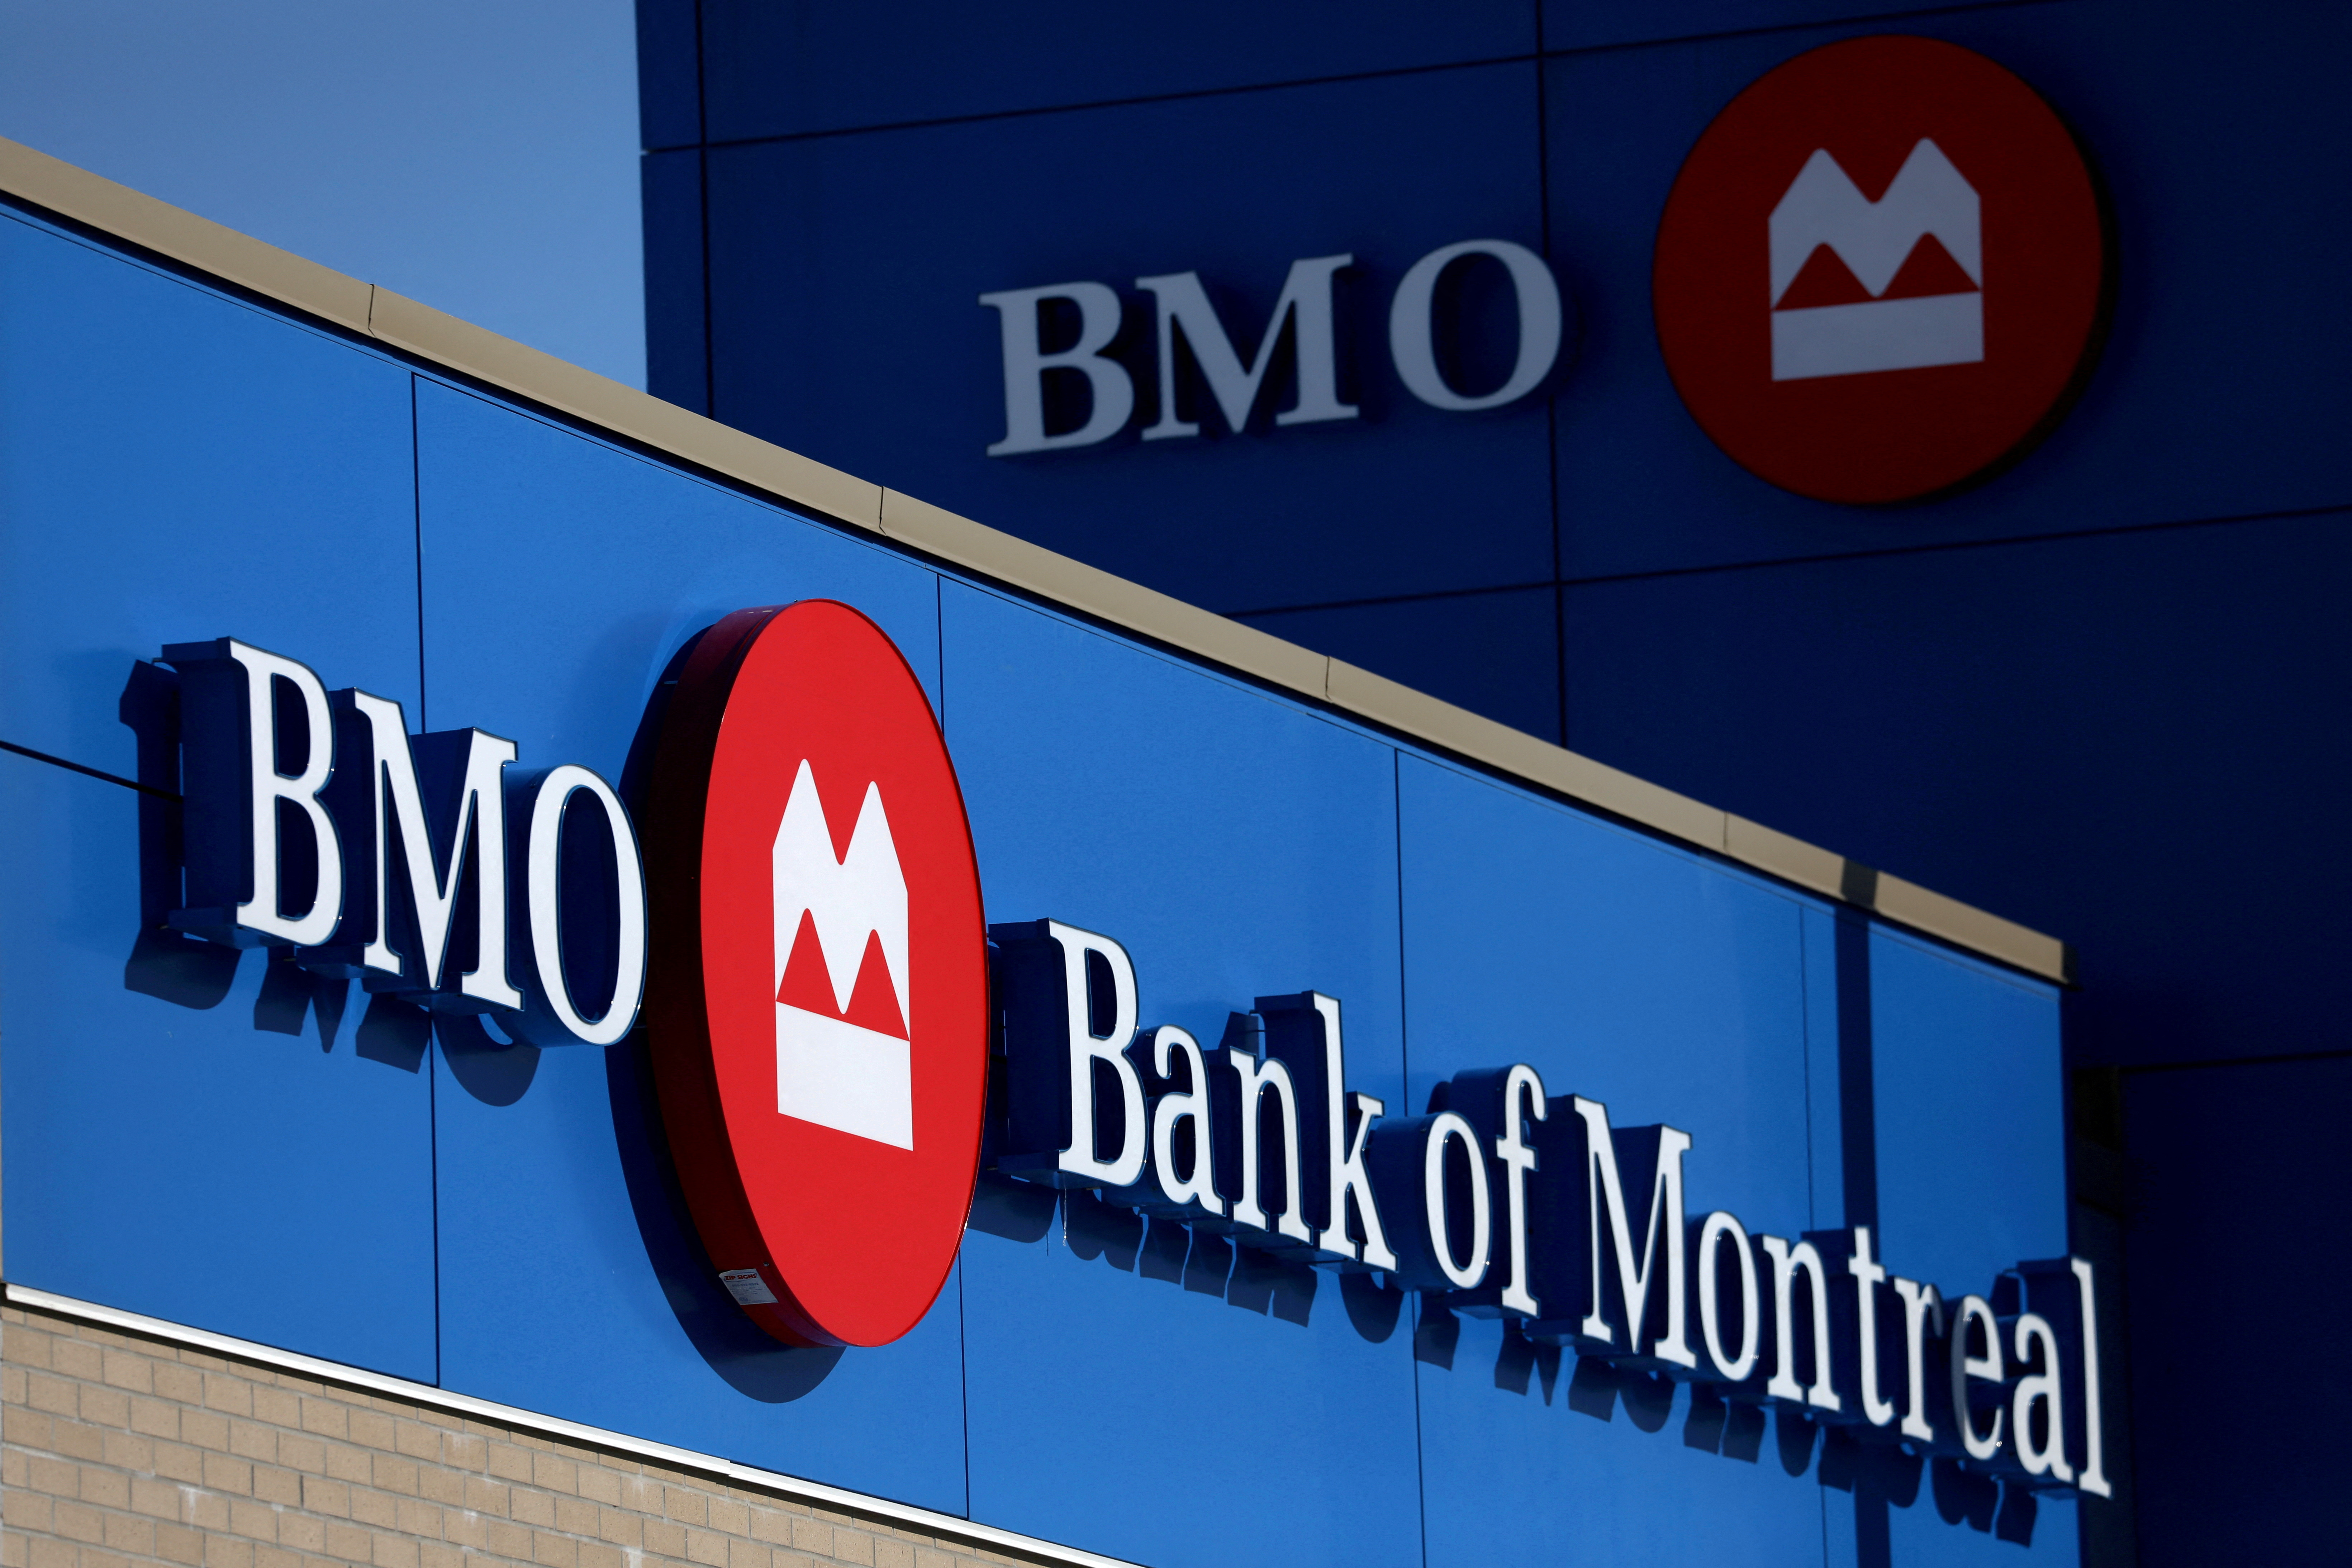 FILE PHOTO: A Bank of Montreal logo is seen outside of a branch in Ottawa